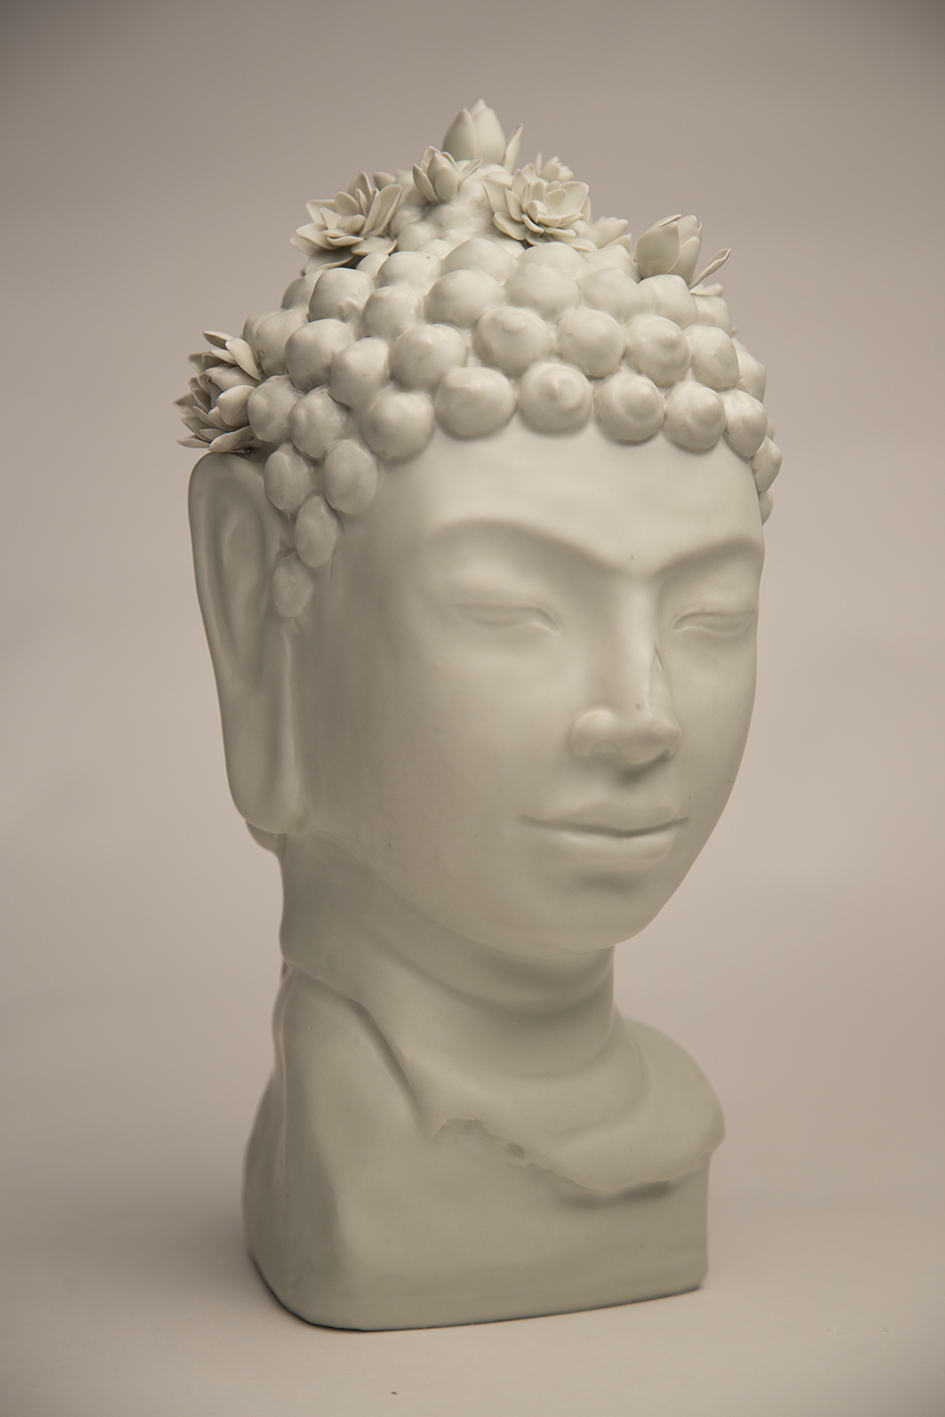 OA 1963.10- 16.1 Head of the Buddha given by the heirs of Dr Louise Elsa Samson (Lotus flowers)